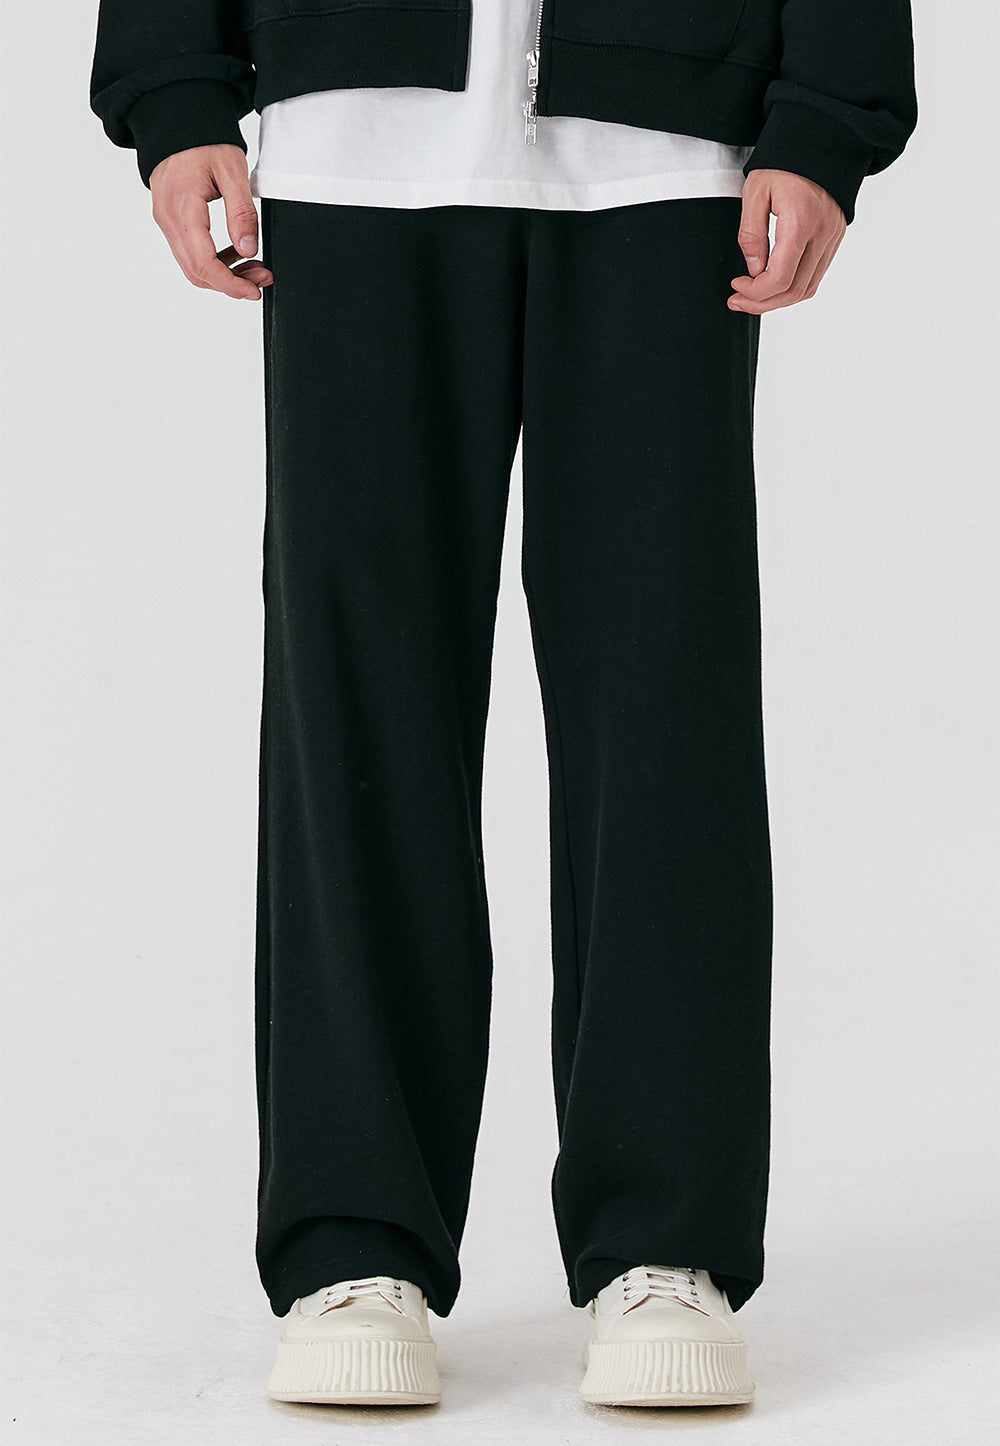 Signature relax wide pants - BLACK